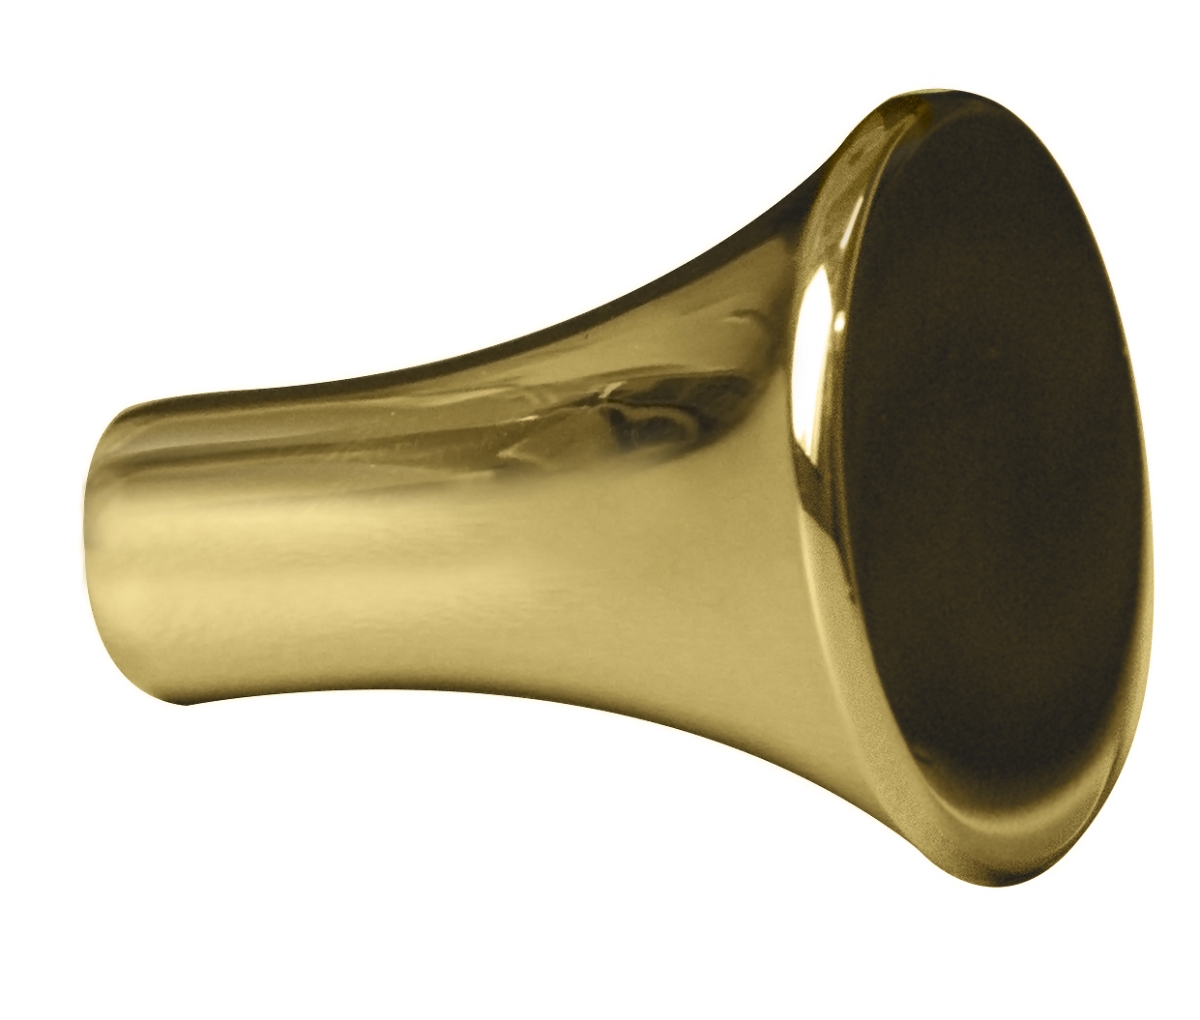 Ai-21418 1 In. Round Stainless Steel Cabinet Knob, Gold